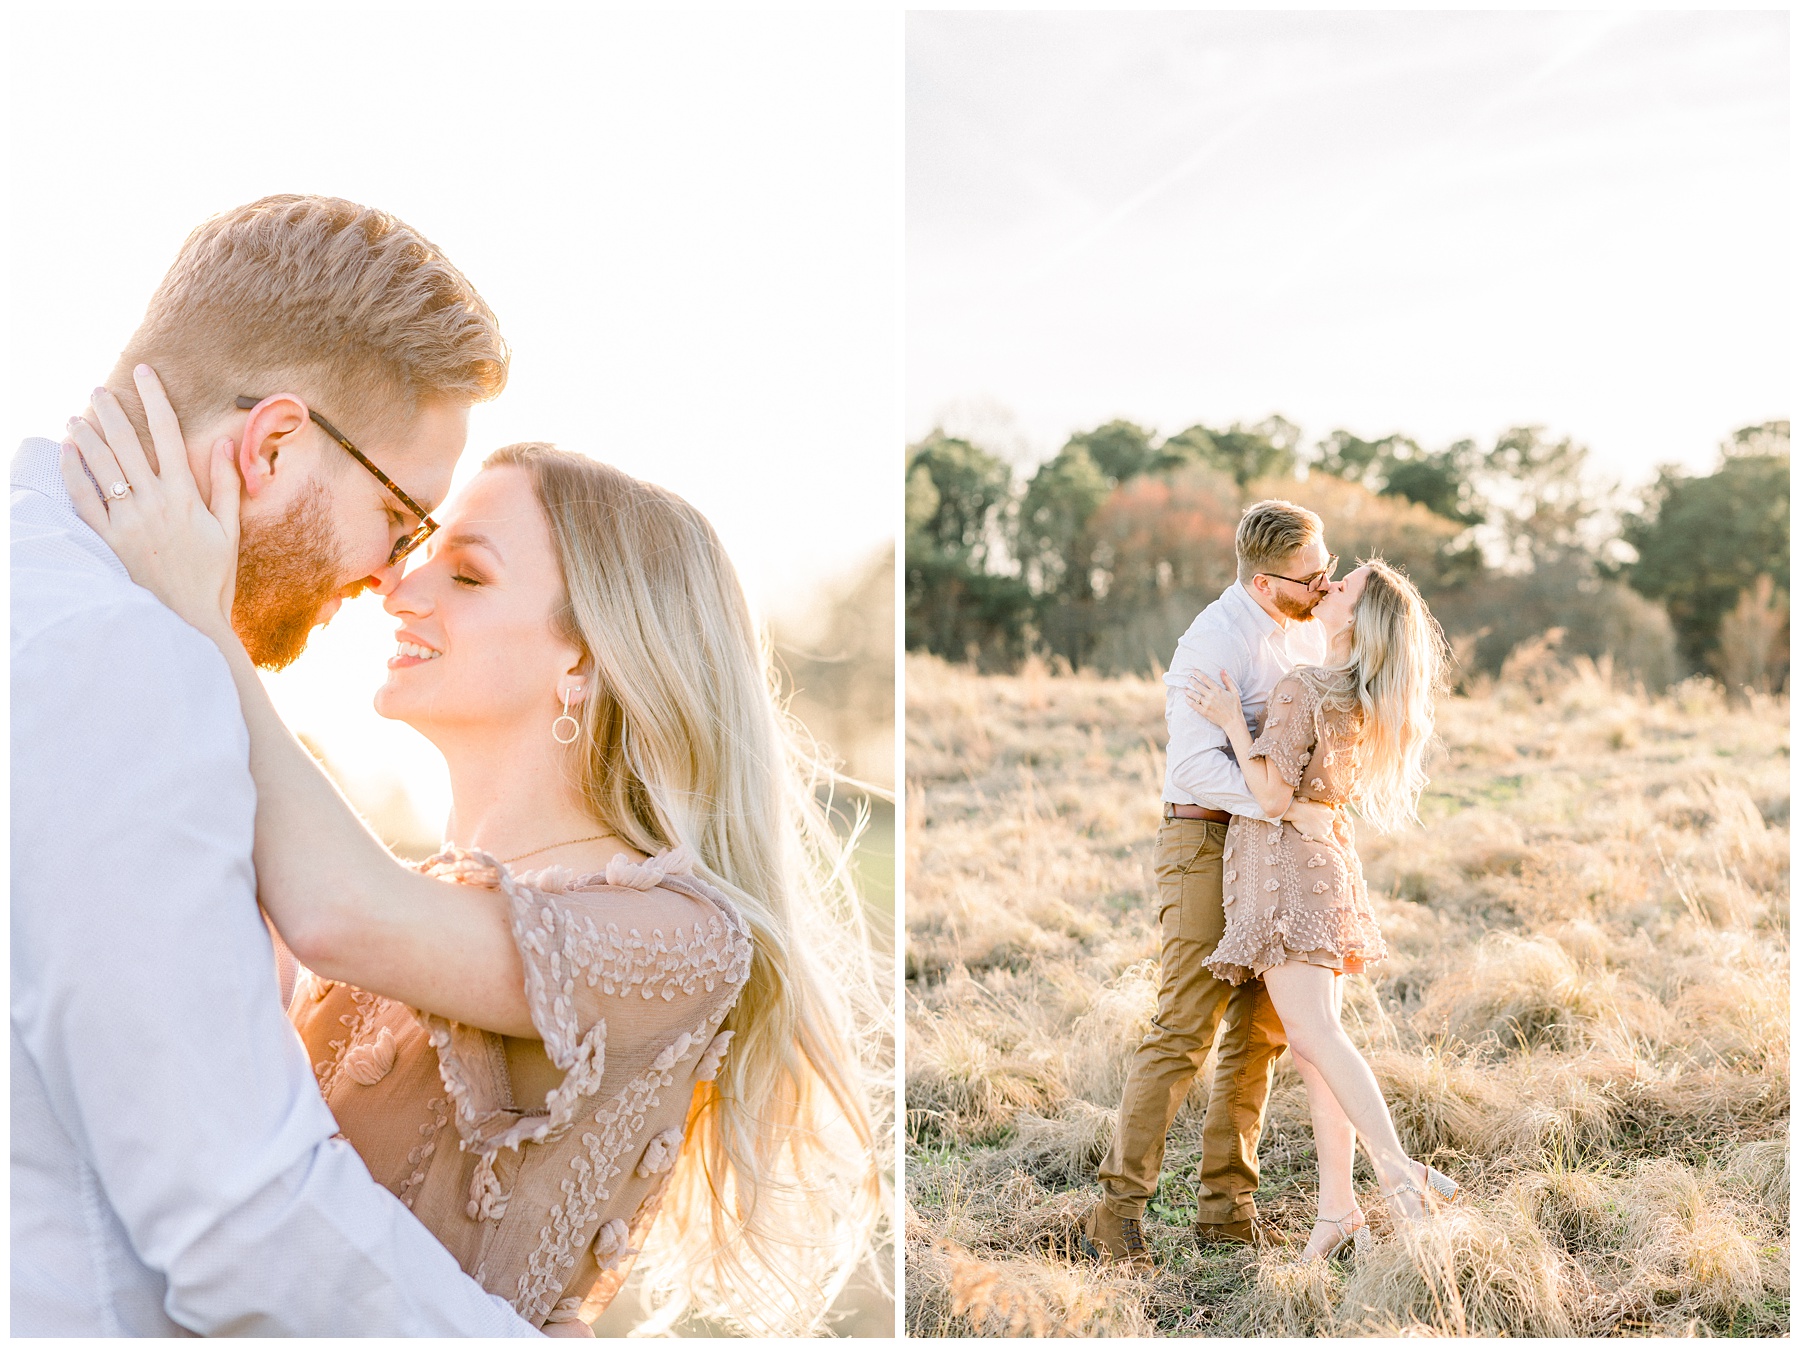 North Carolina Museum of Art Spring Engagement Session in Raleigh North Carolina. Playing in Sun soaked fields at sunset